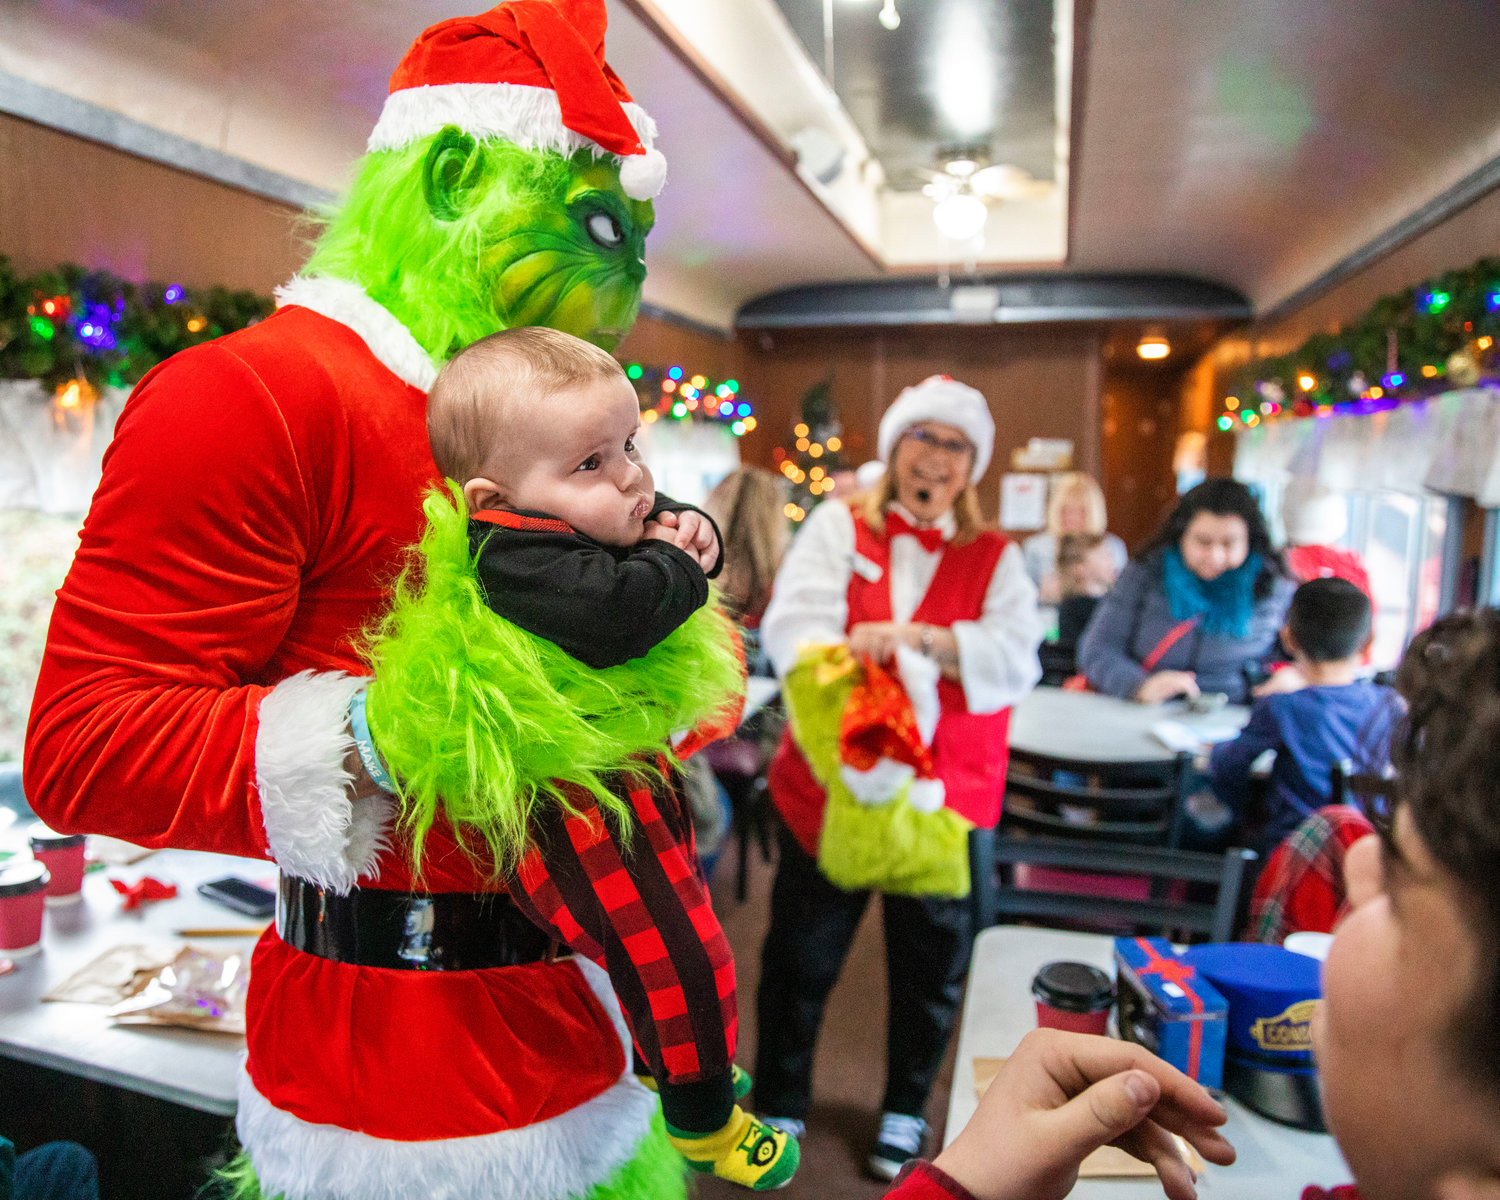 The Grinch poses for a photo with 4-month-old Paxton at the Steam Train Depot in Chehalis on Saturday.